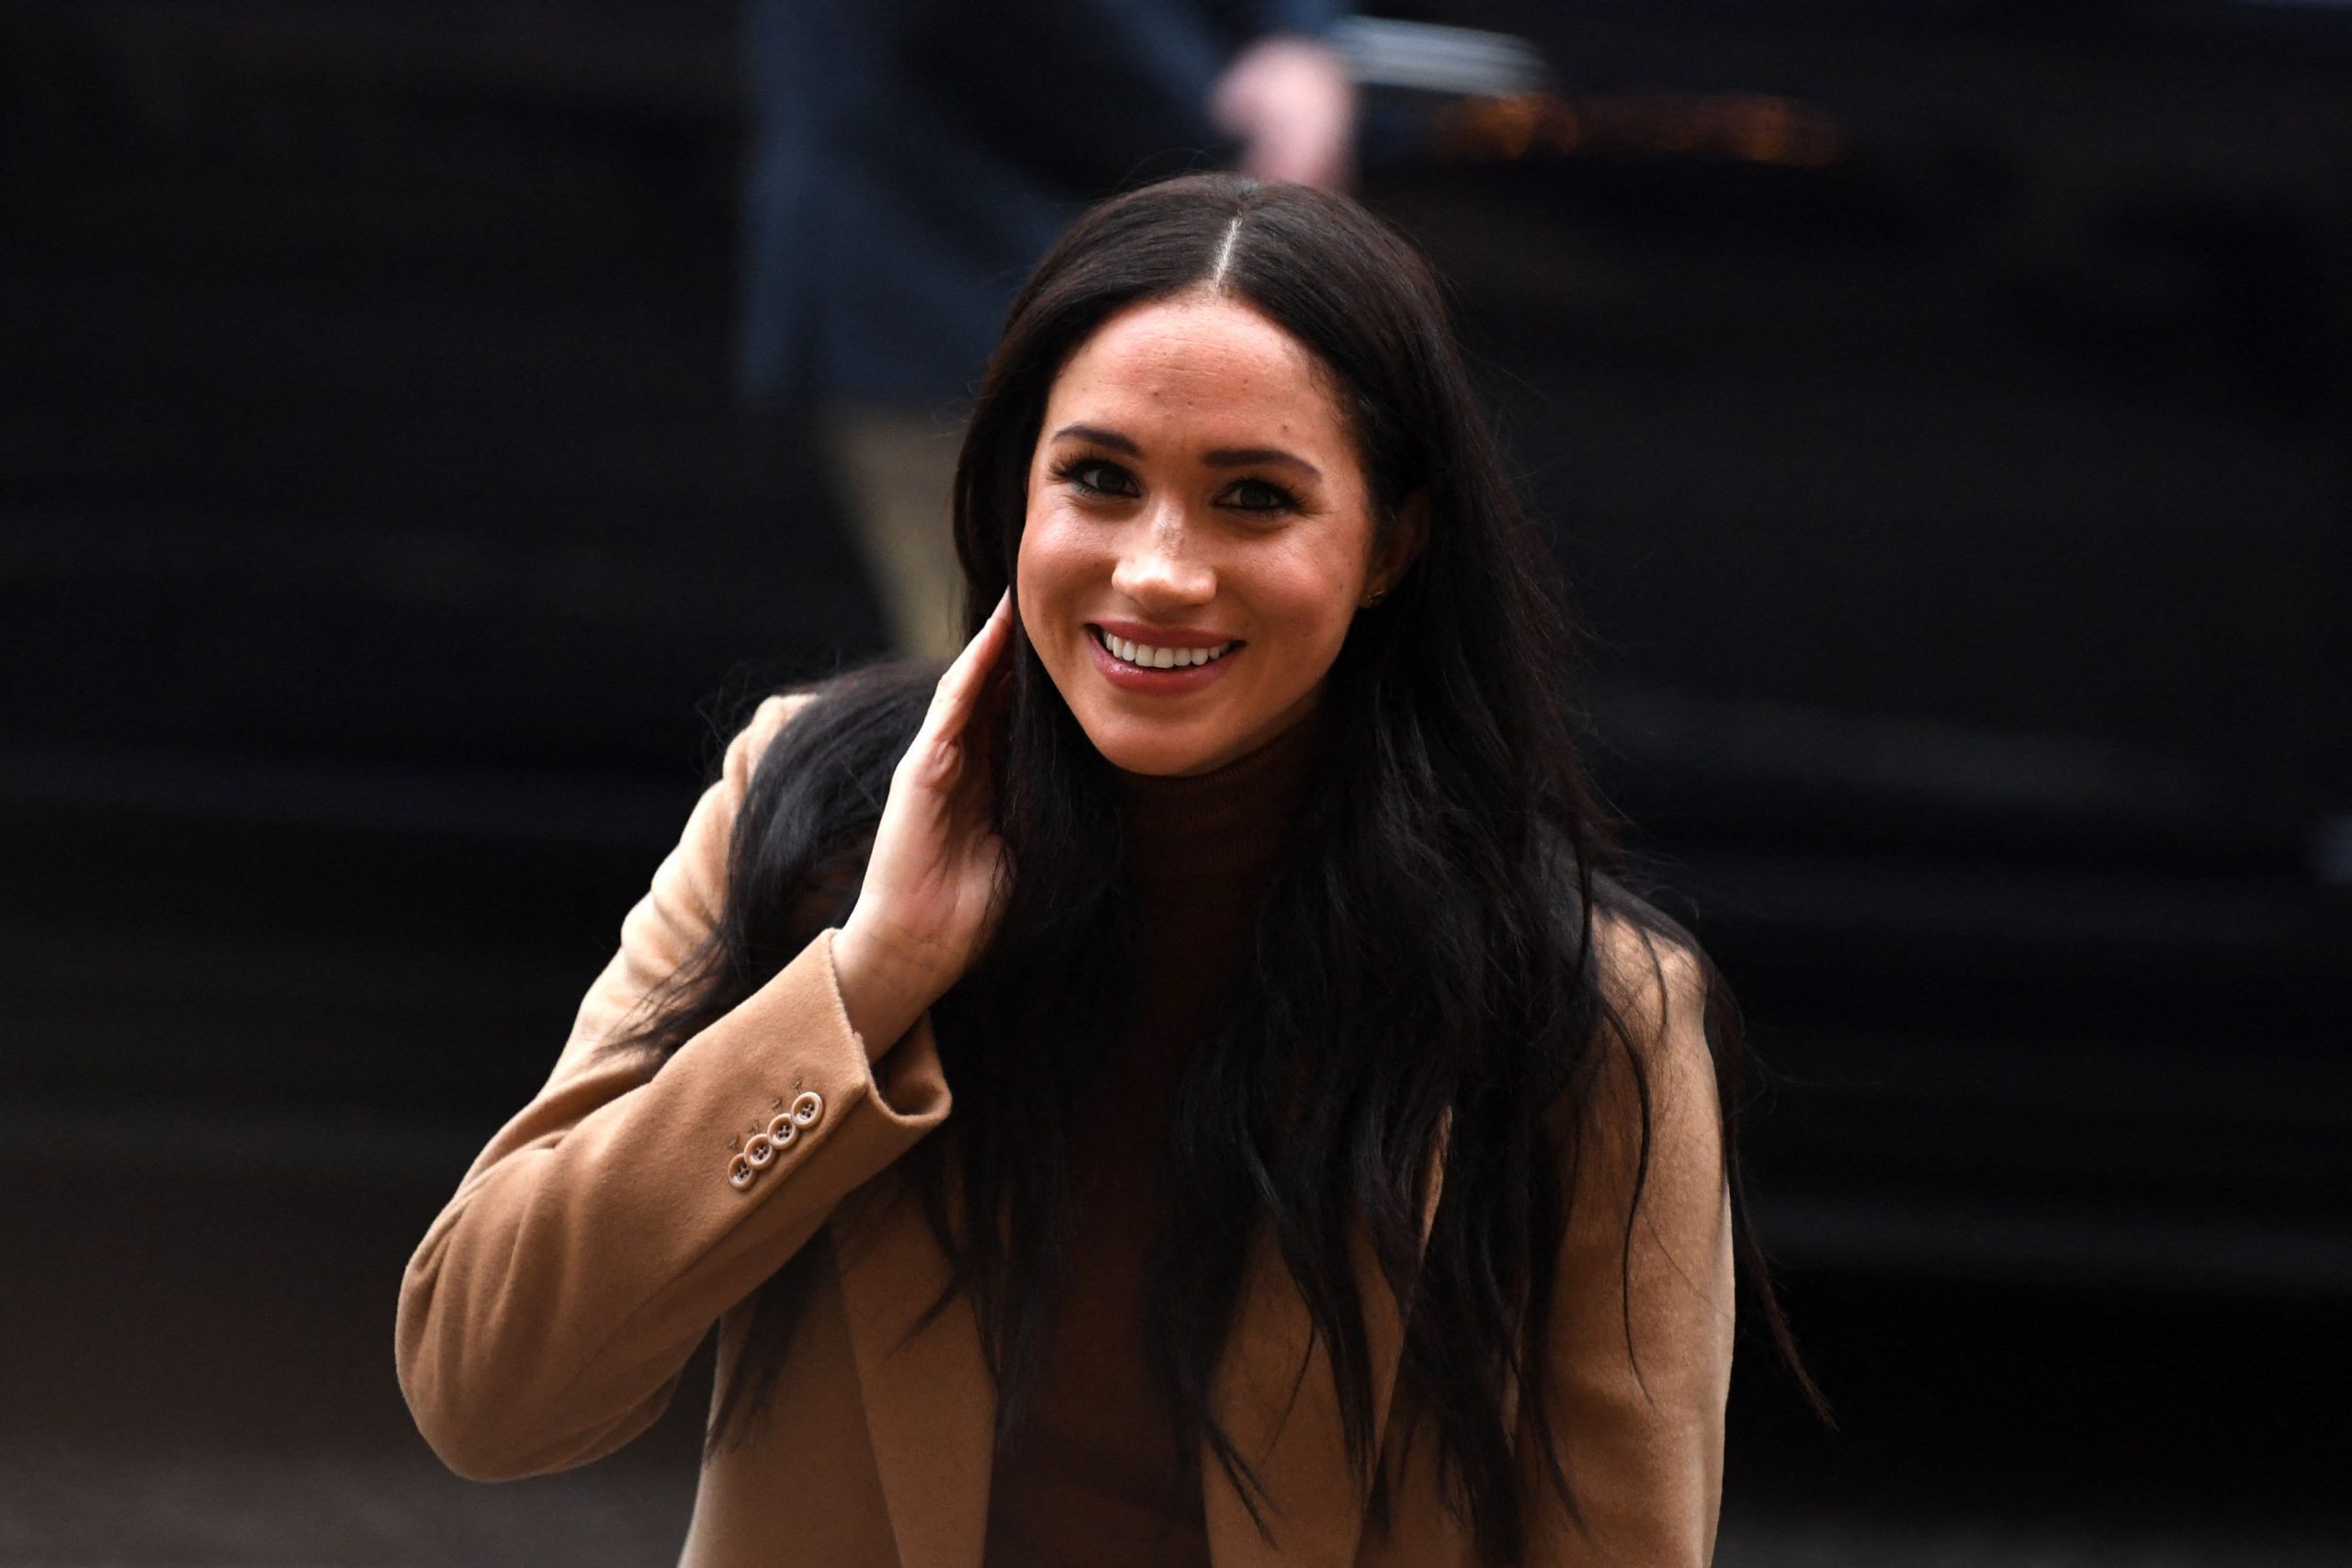 Meghan Markle’s advice for any actor playing her: Find the silliness